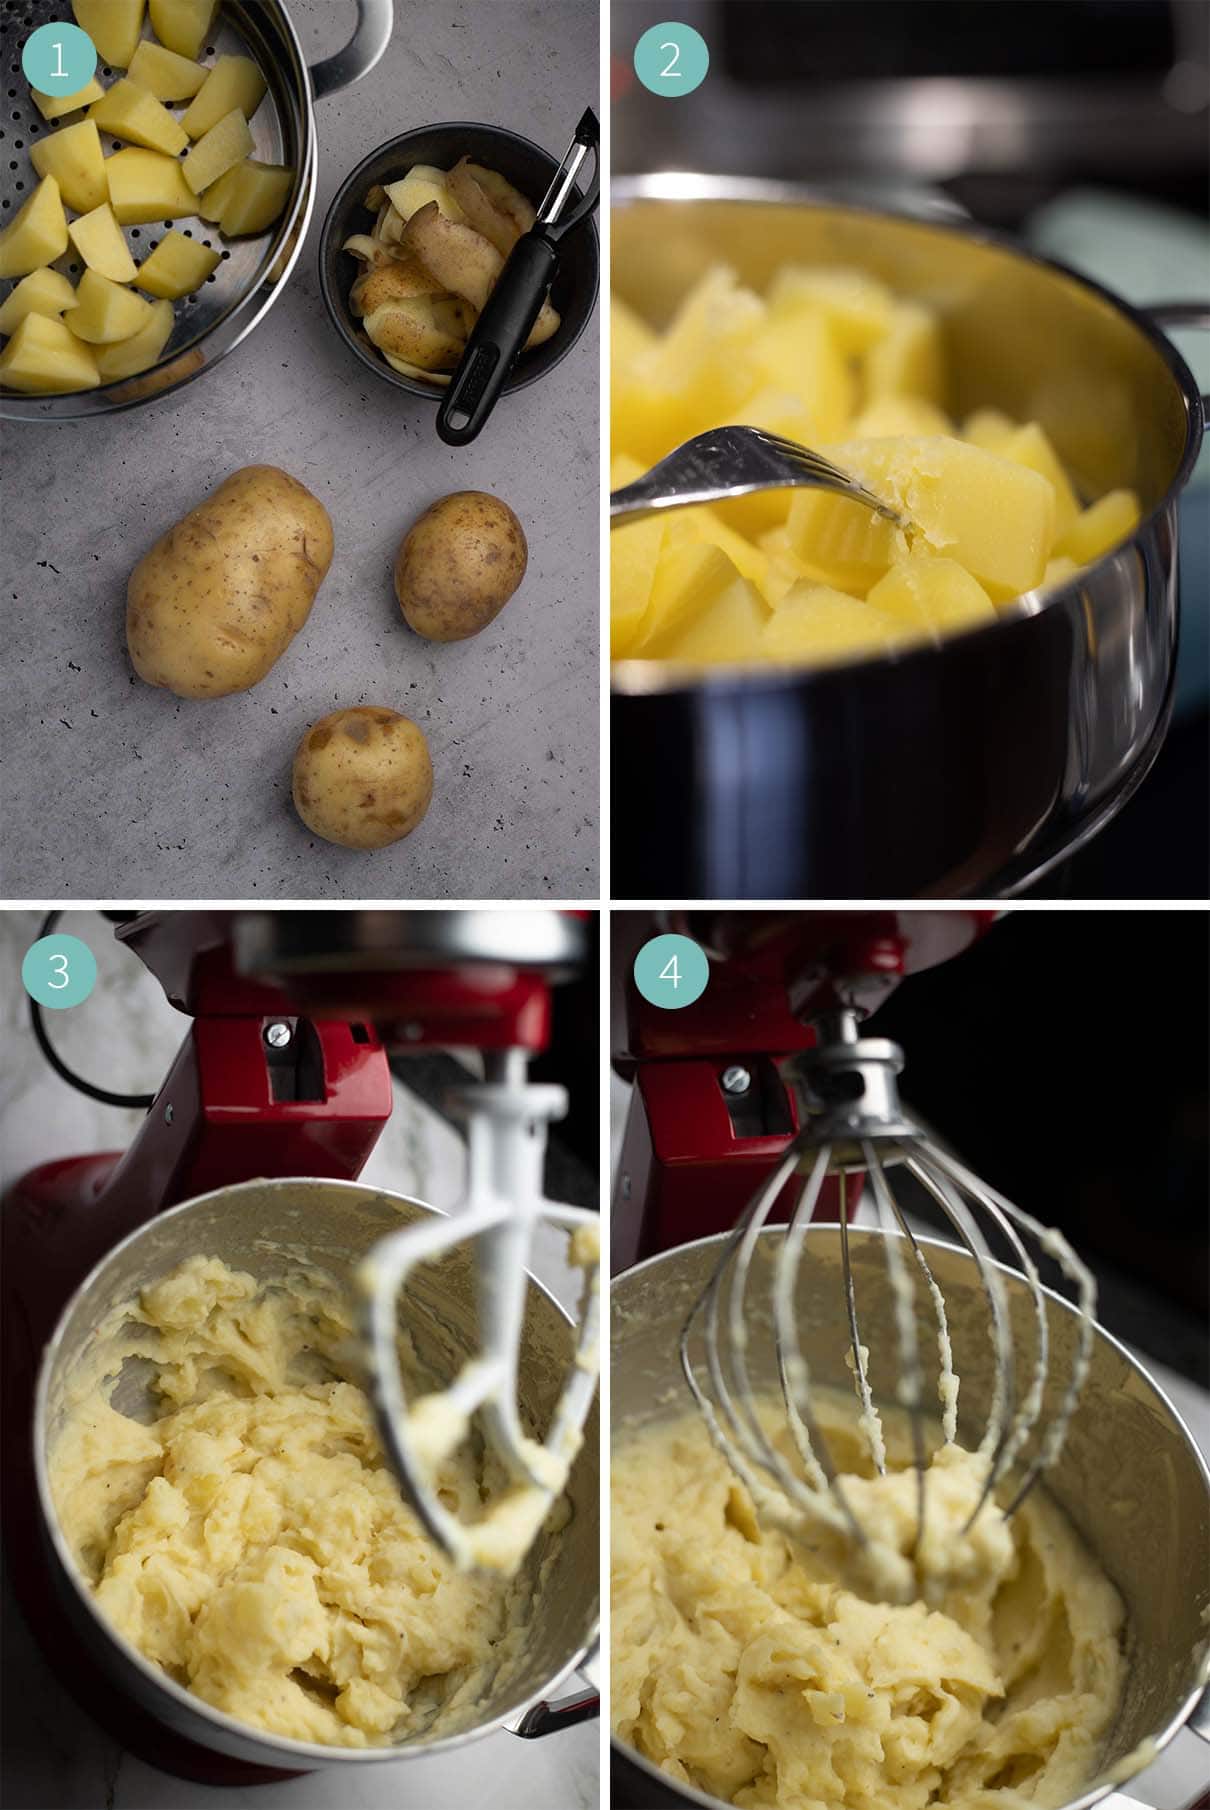 https://www.lexasrecipes.com/wp-content/uploads/2022/01/Instructions-for-mashed-potatoes-Step-1-to-4-in-pictures-vertical-grid.jpg